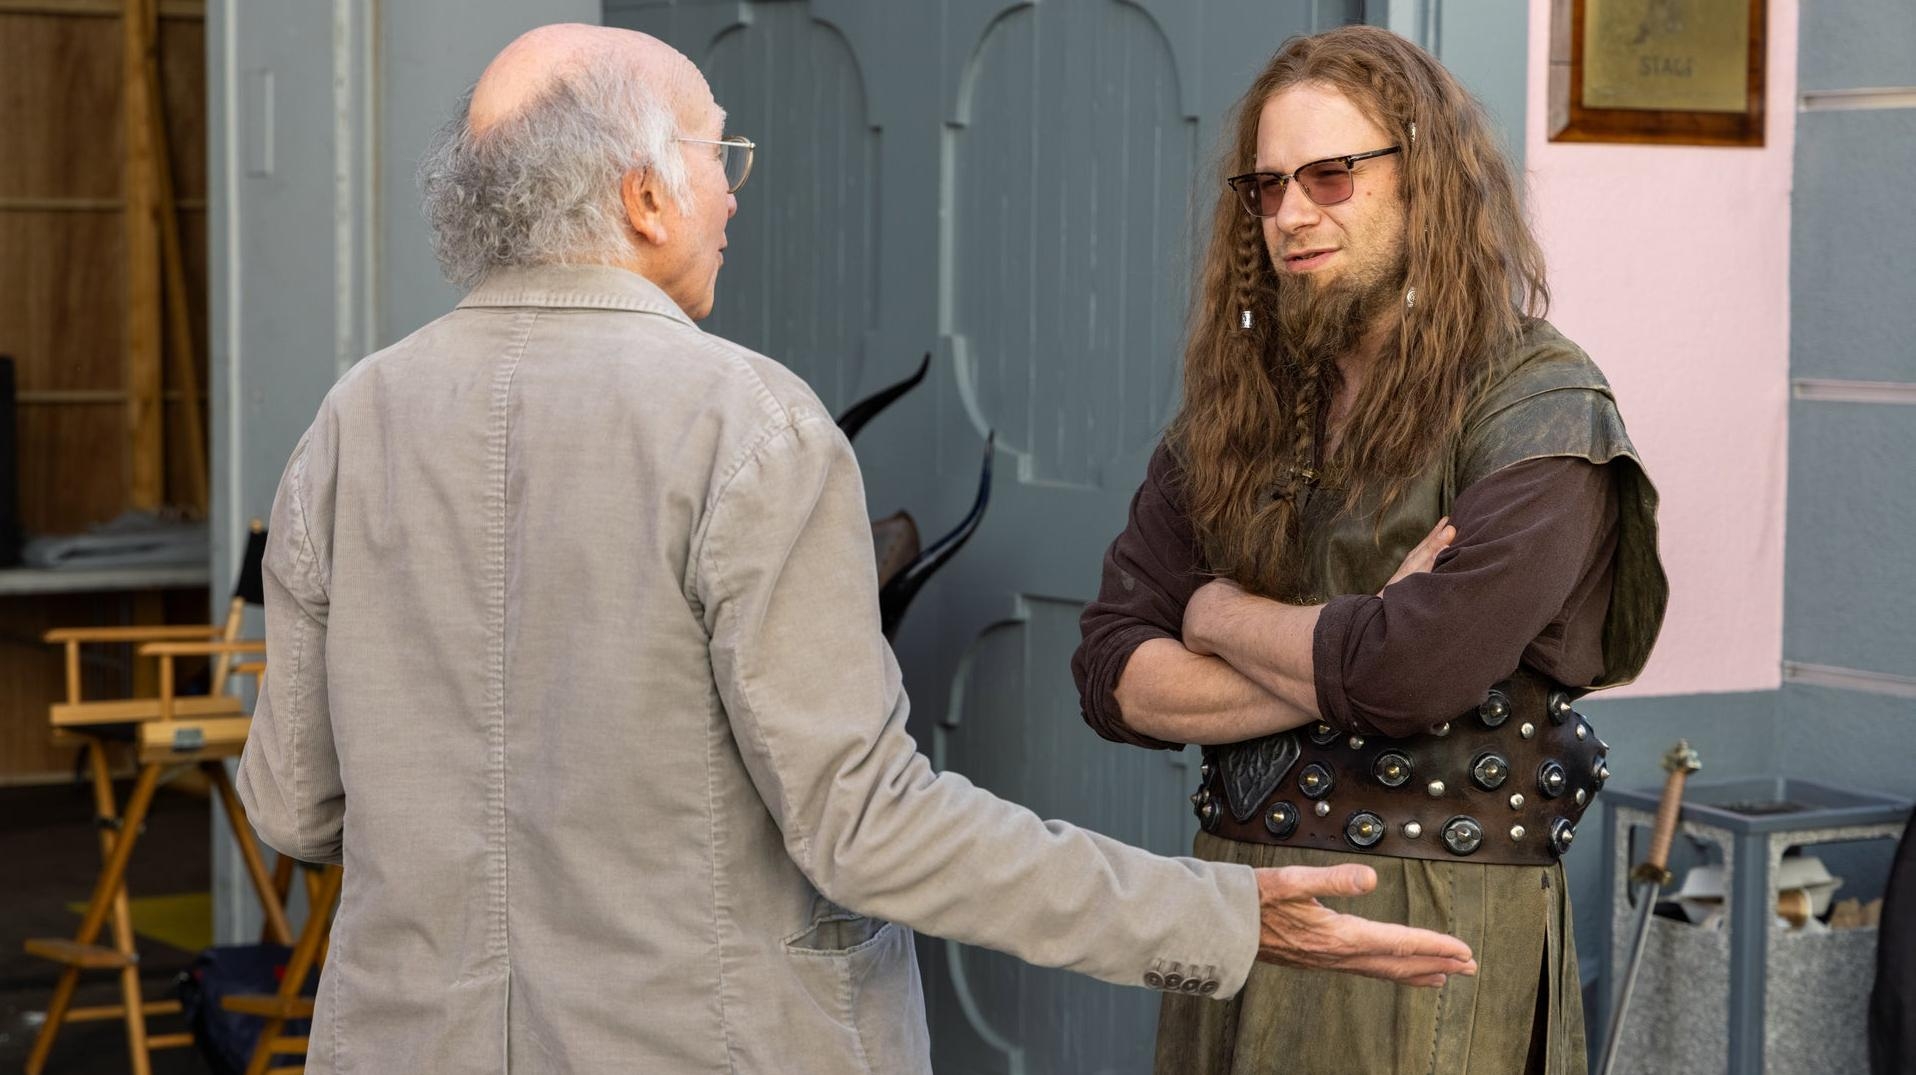 Seth Rogen tries to dismantle some of Larry’s hang-ups on Curb Your Enthusiasm